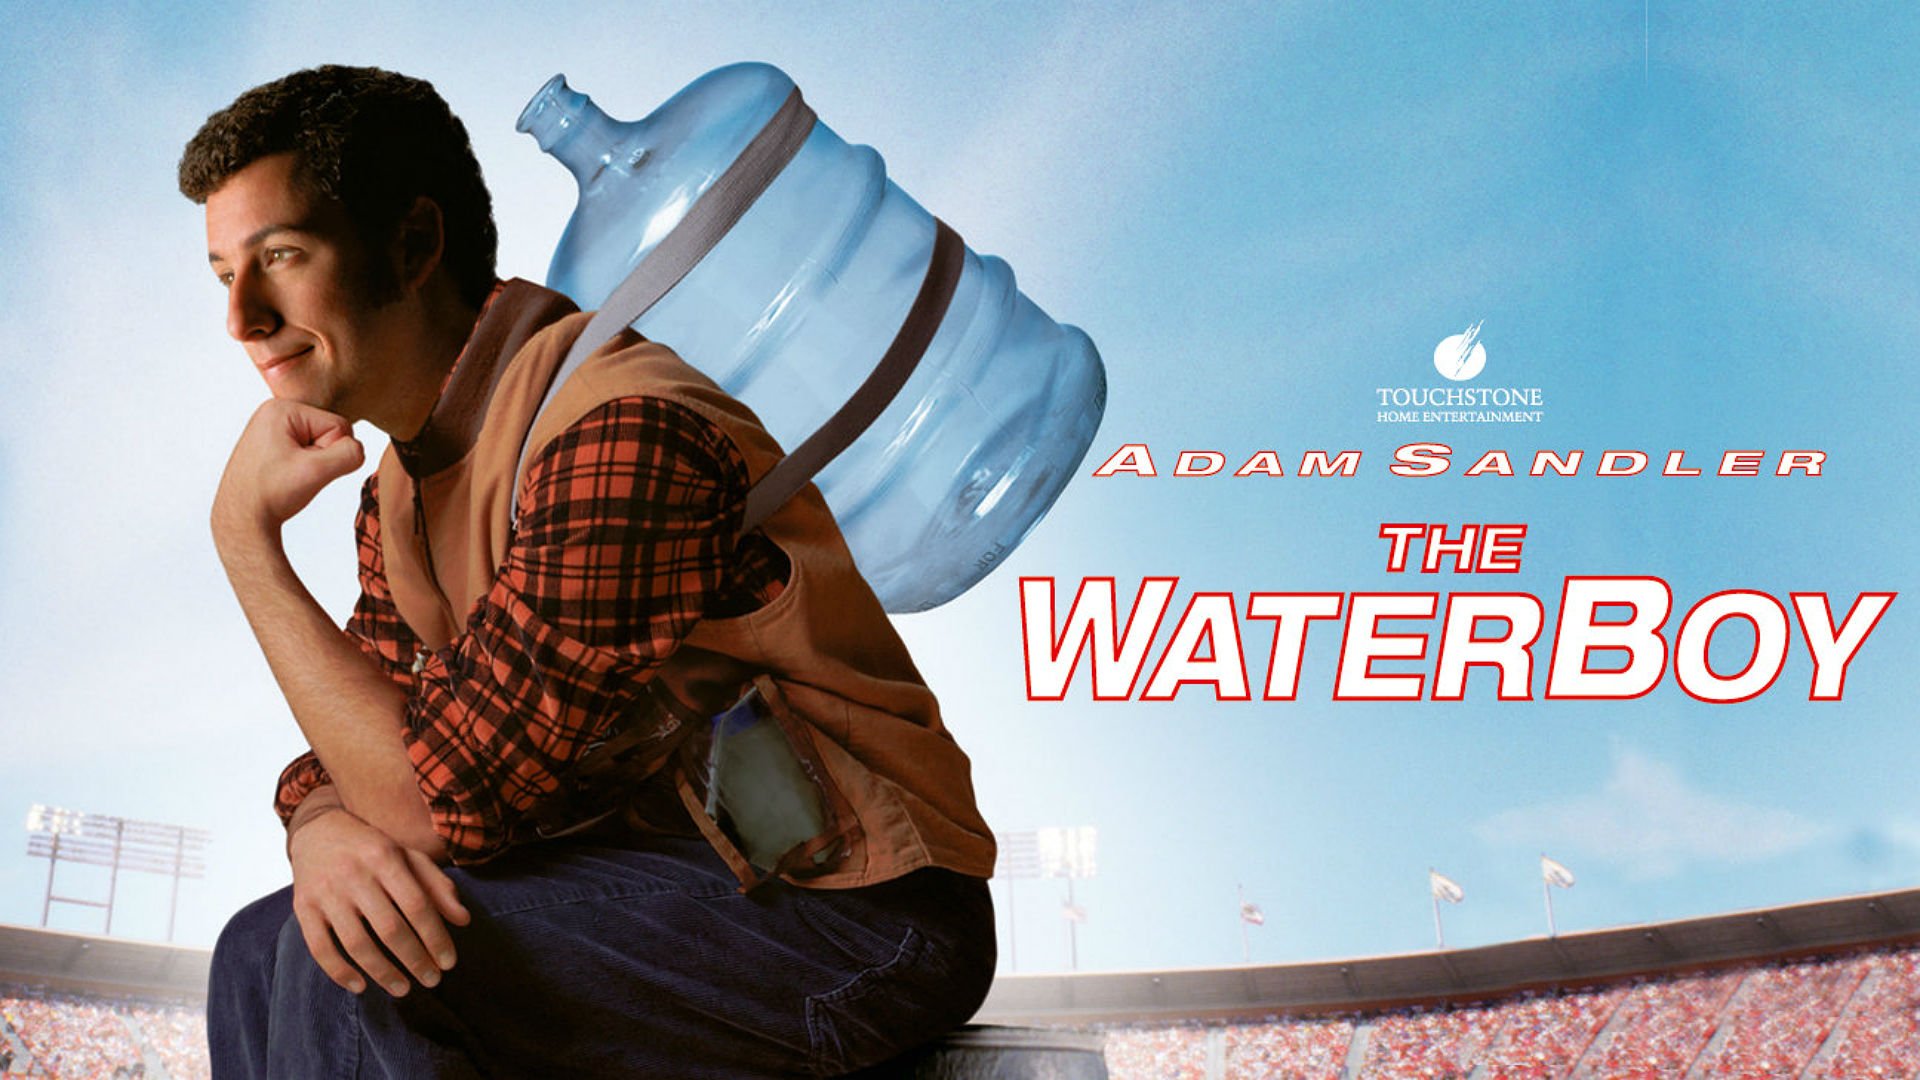 WATERBOY comedy football sports sandler wallpapers.